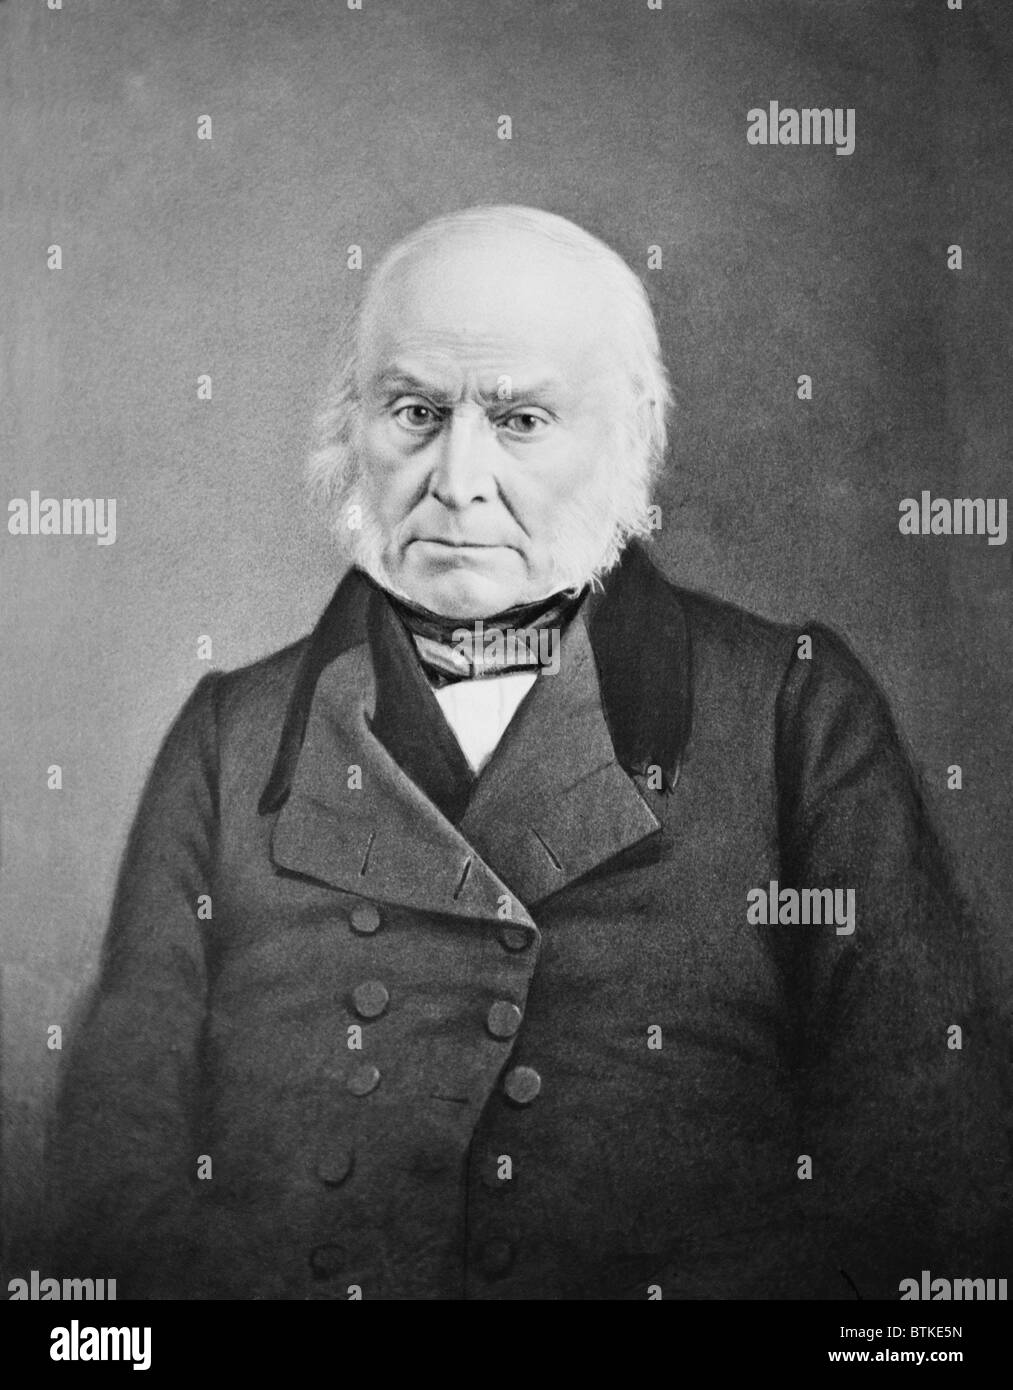 John Quincy Adams (1767-1848), was U.S. President from 1825-1829. After his presidency he was elected to the House of Representatives, where he served until his death in 1848. Daguerreotype by Mathew Brady, ca. 1847. Stock Photo